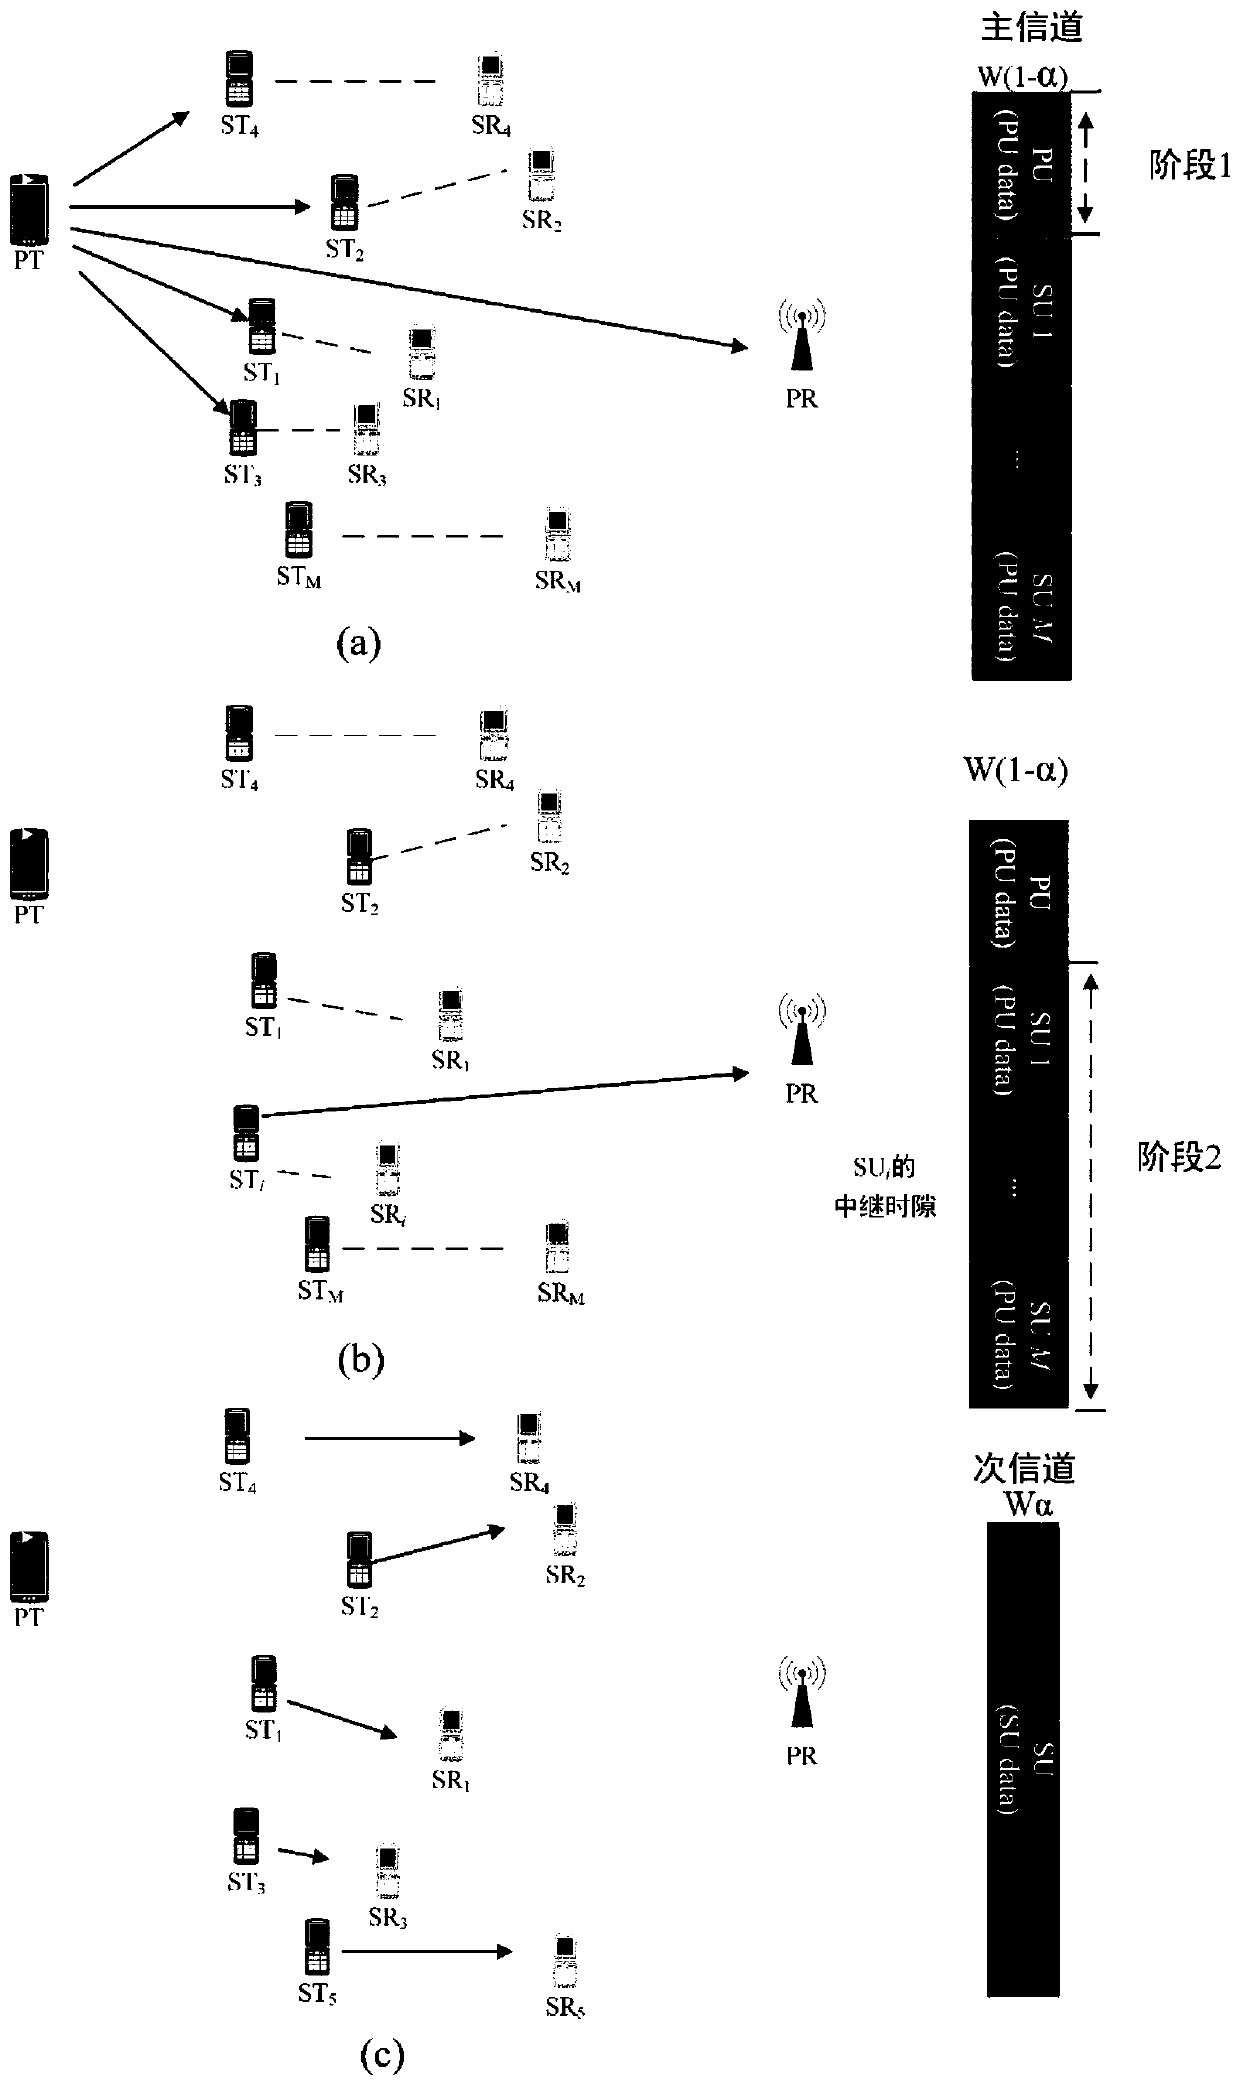 A Method for Energy Efficient Resource Allocation in Cooperative Cognitive Wireless Networks